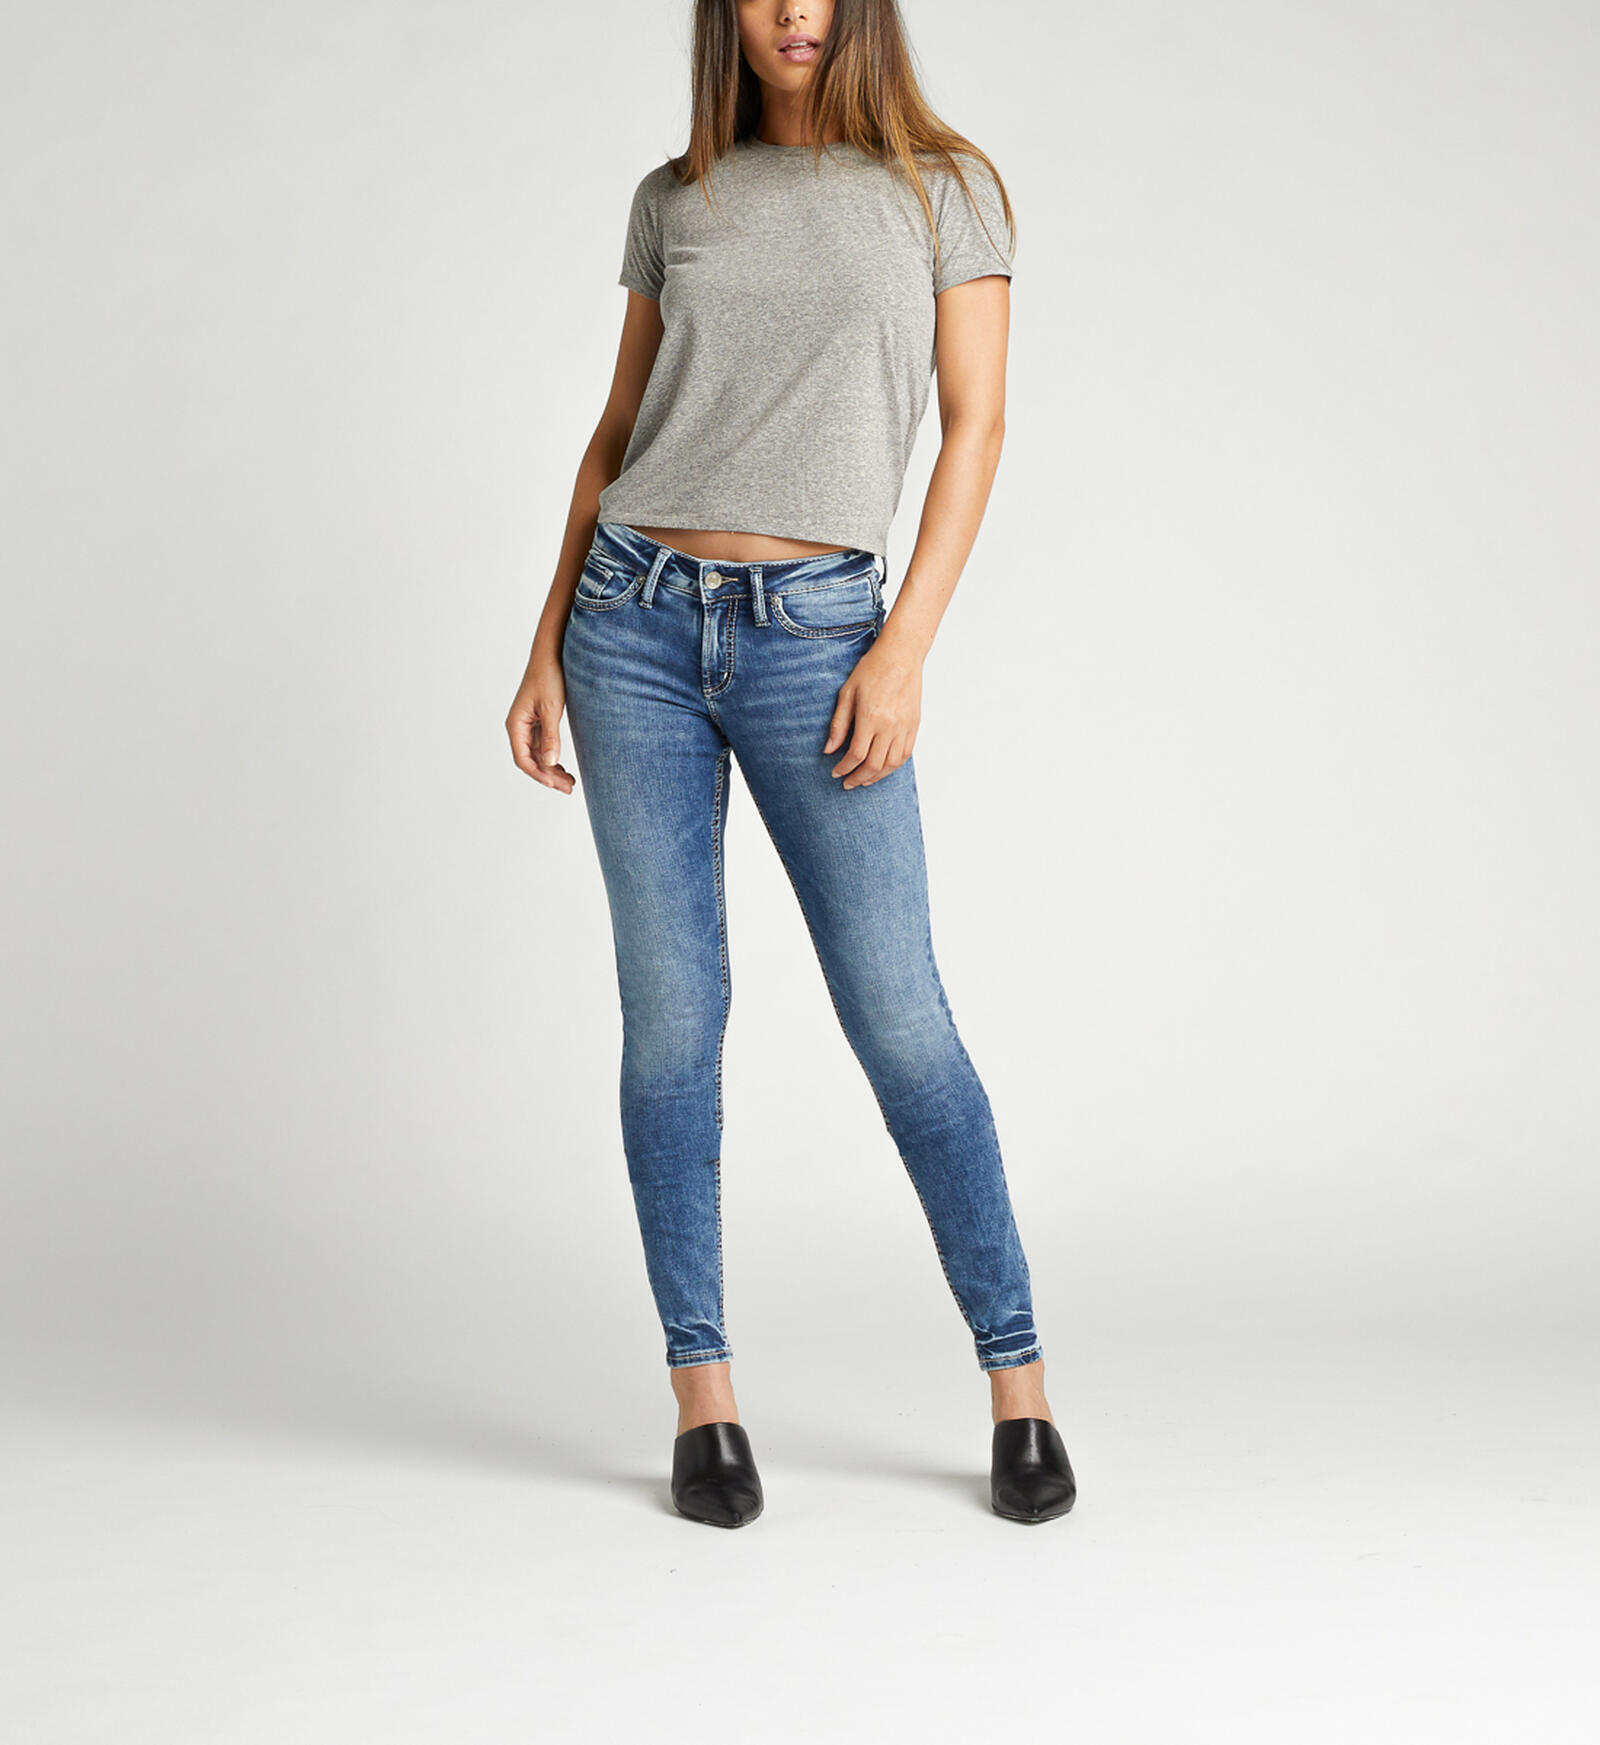 Buy Suki Mid Rise Skinny Jeans for USD 89.00